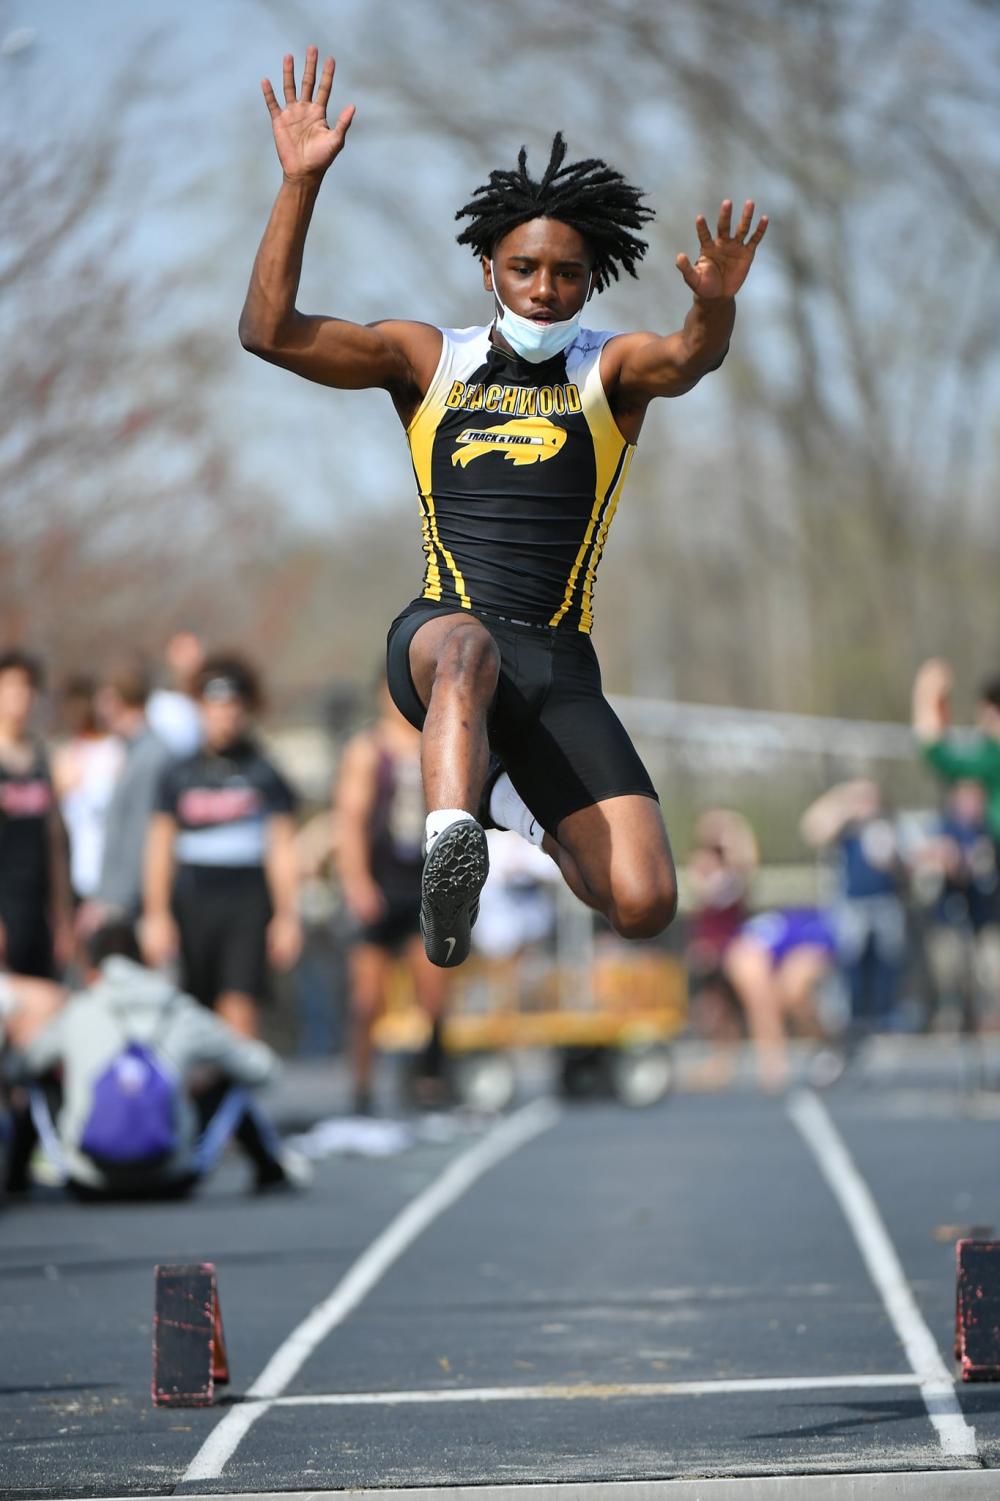 Senior Jasir Holmes soars in the long jump. He will be advancing to regionals in the 4x100 and 4x200 relays.